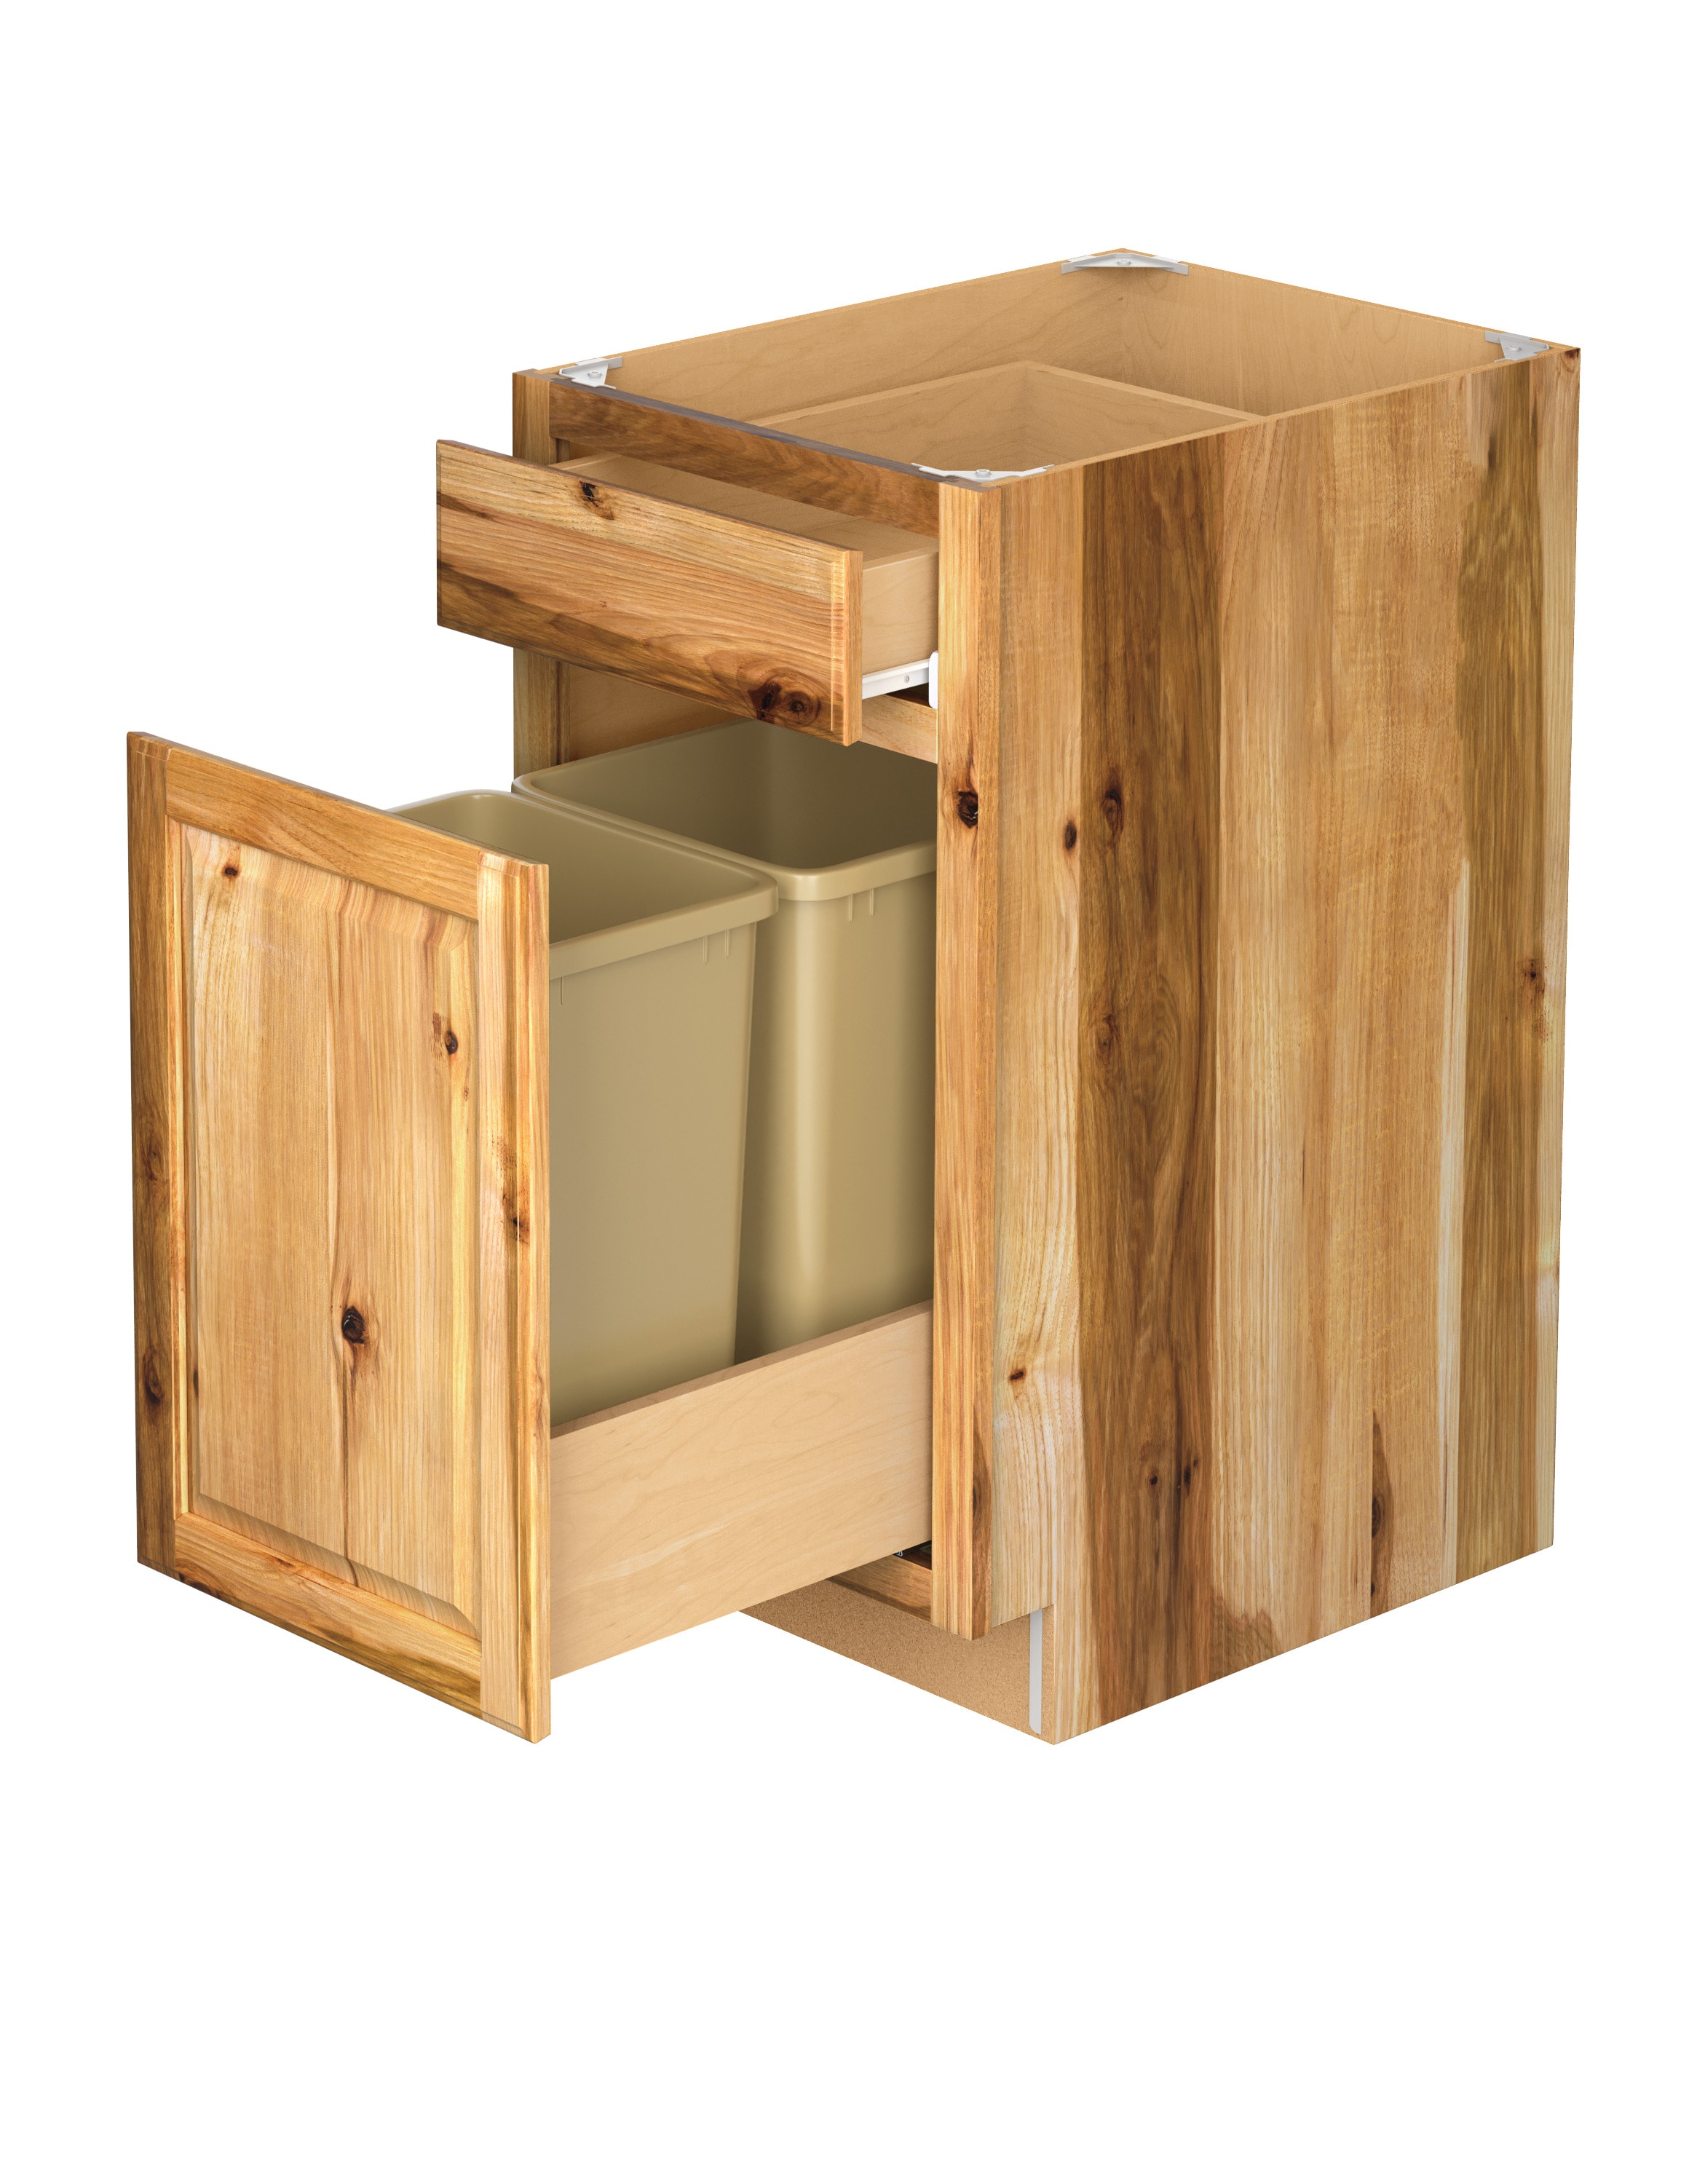 Diamond at Lowes - Organization - Solid Wood Tiered Cutlery Divider